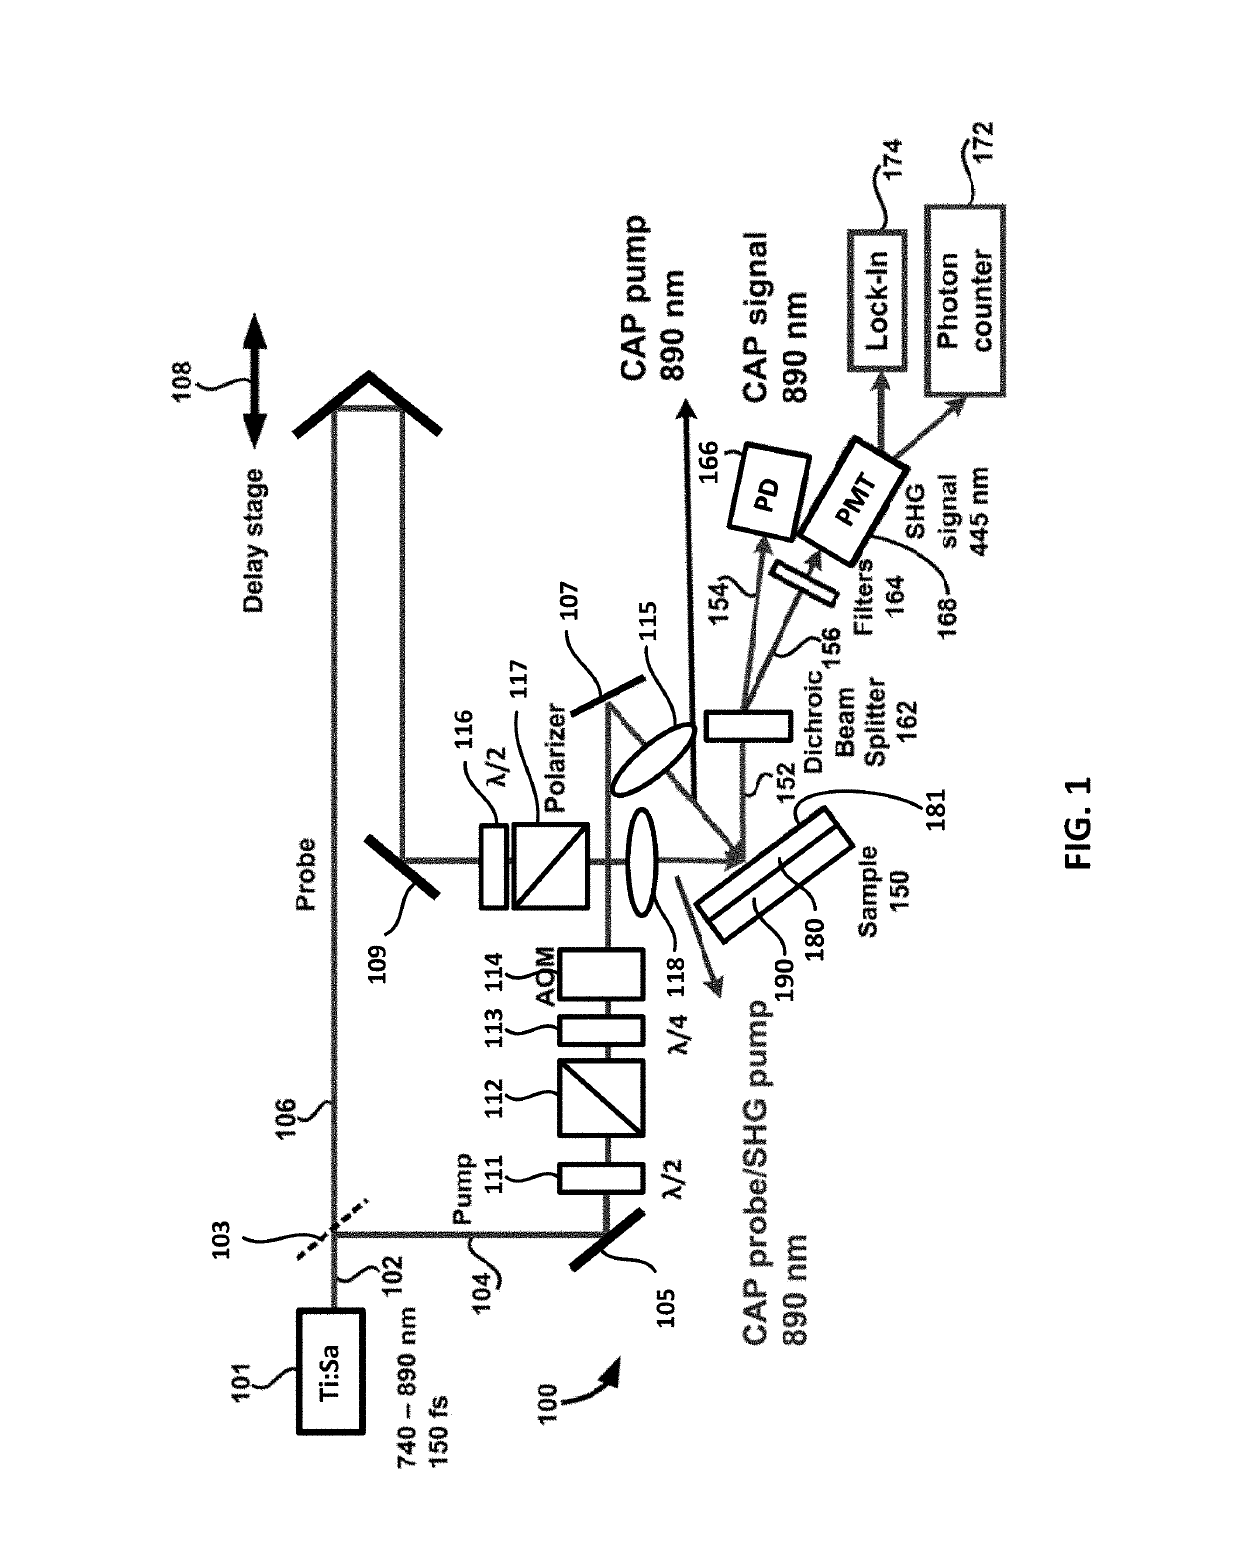 Apparatus and methods for probing a material as a function of depth using depth-dependent second harmonic generation